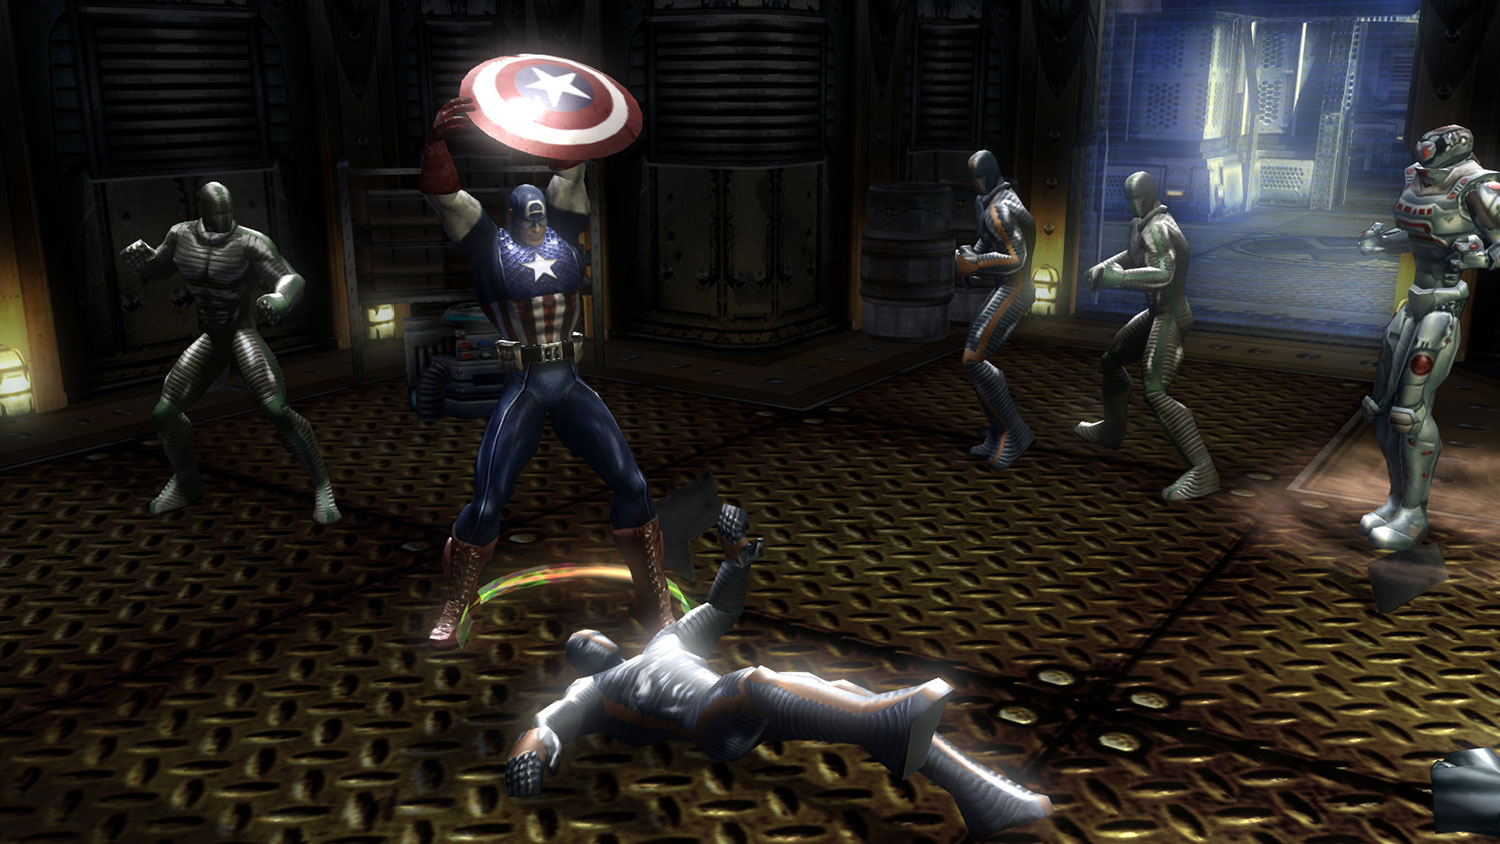 Marvel - Ultimate Alliance 2 Game for Android - Download